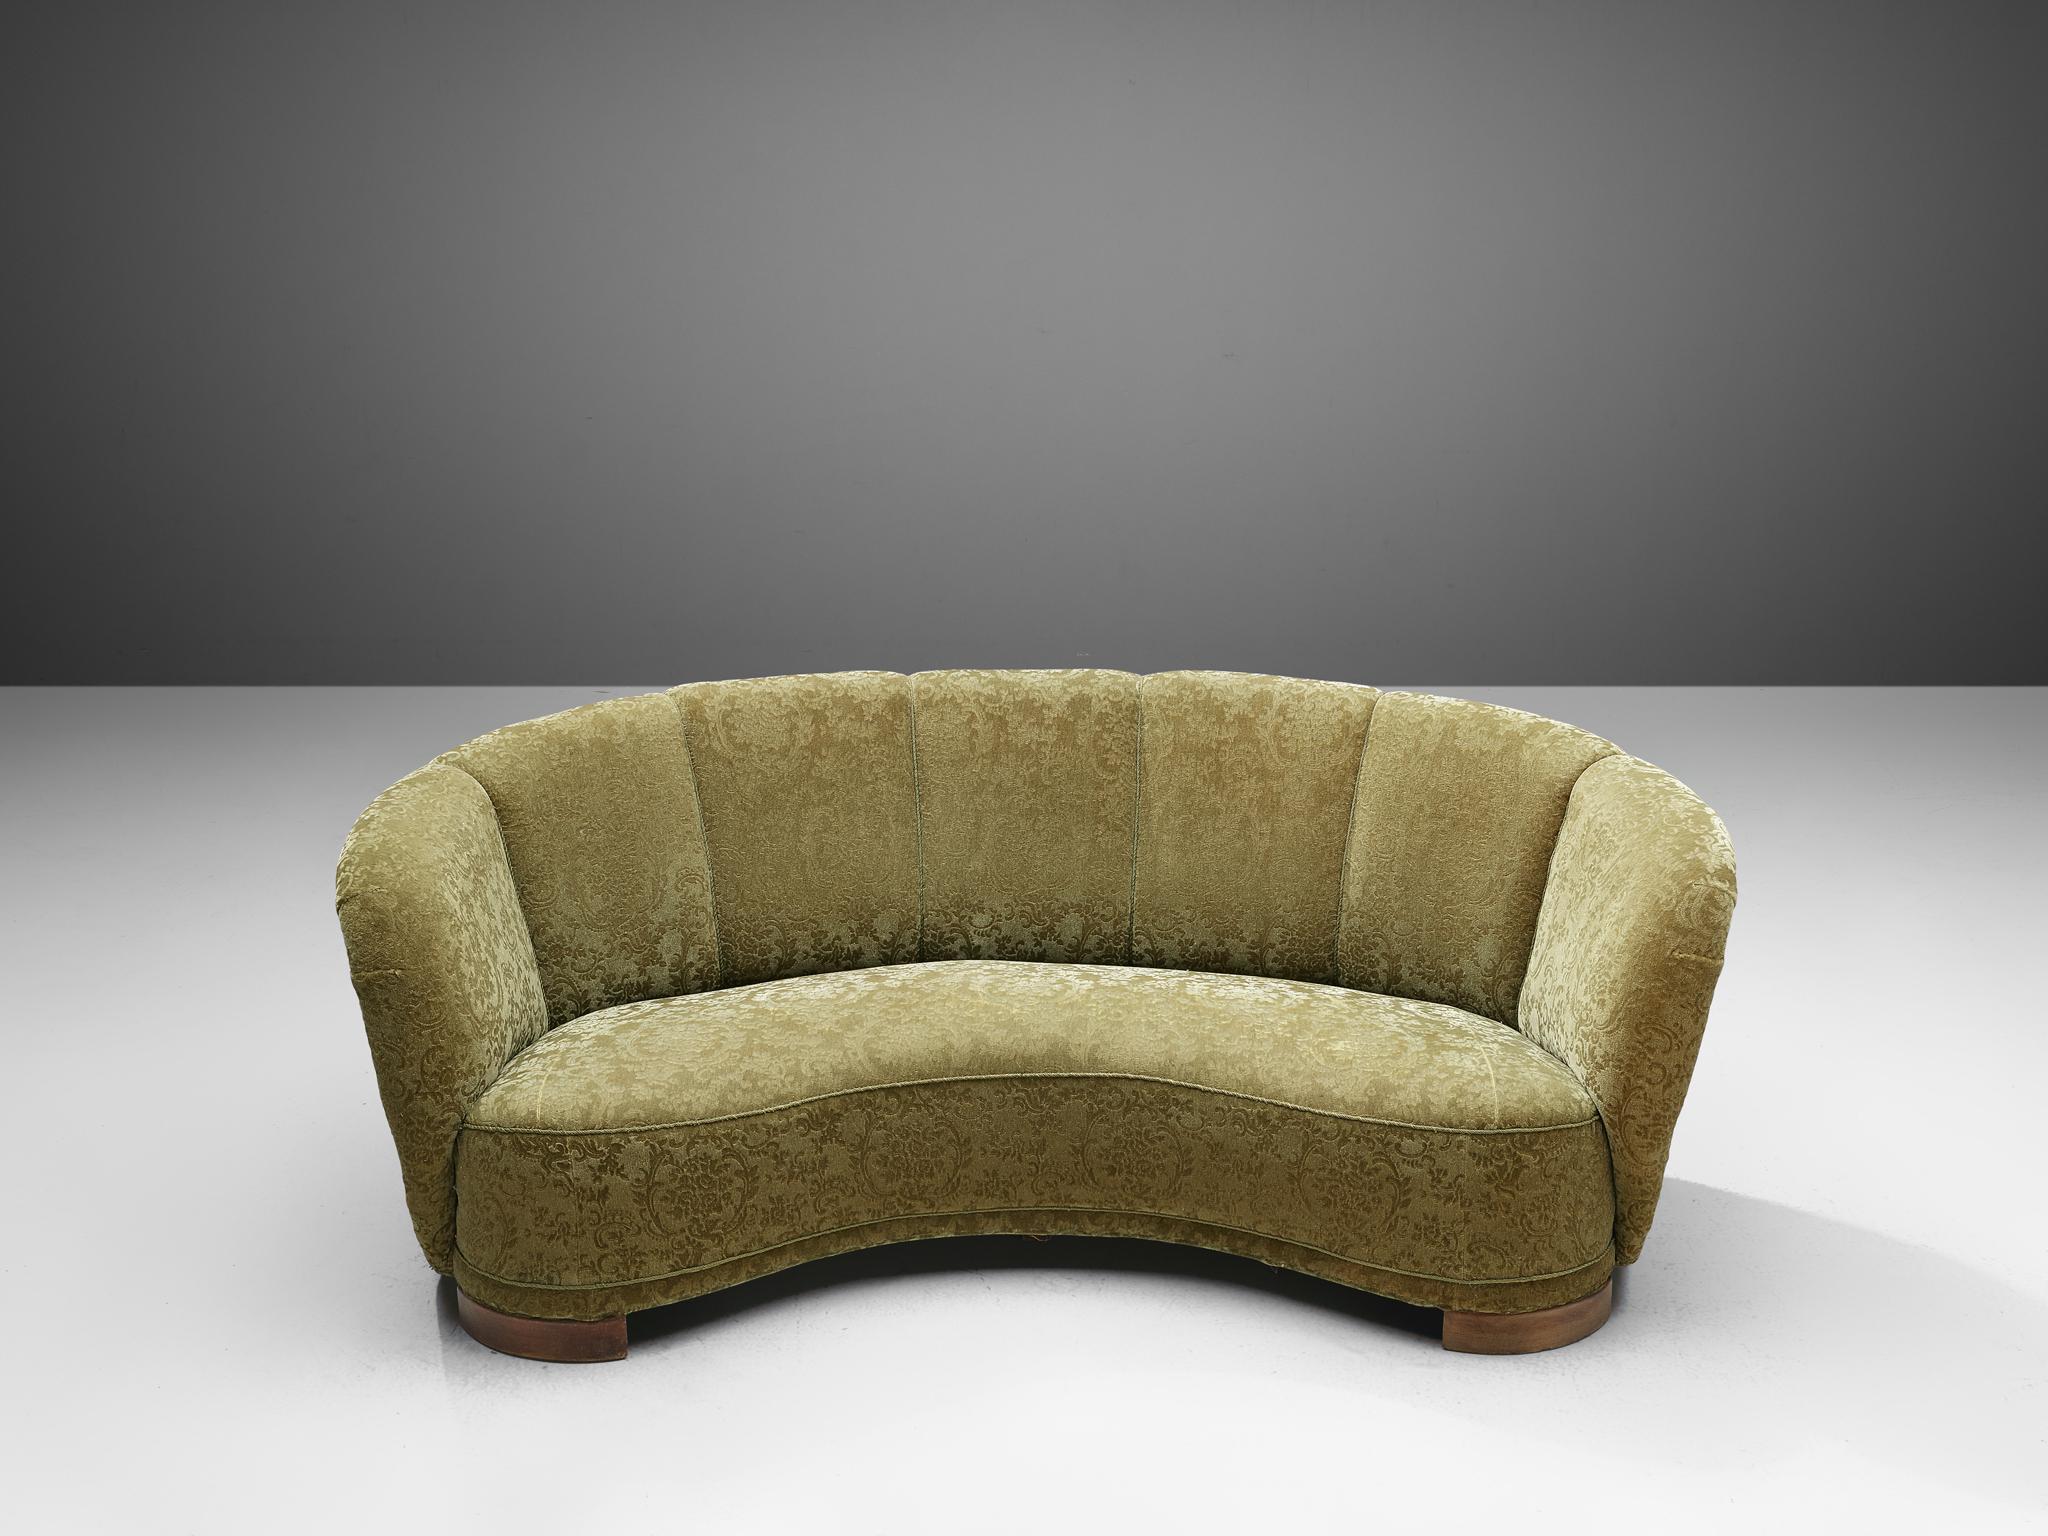 Banana sofa, textured floral upholstery and oak, Denmark, 1940s.

This voluptuous sofa is executed with wooden legs and a moss green classic floral velvet. The sofa has a high lined and curved back, while the backrest is horizontal straight and